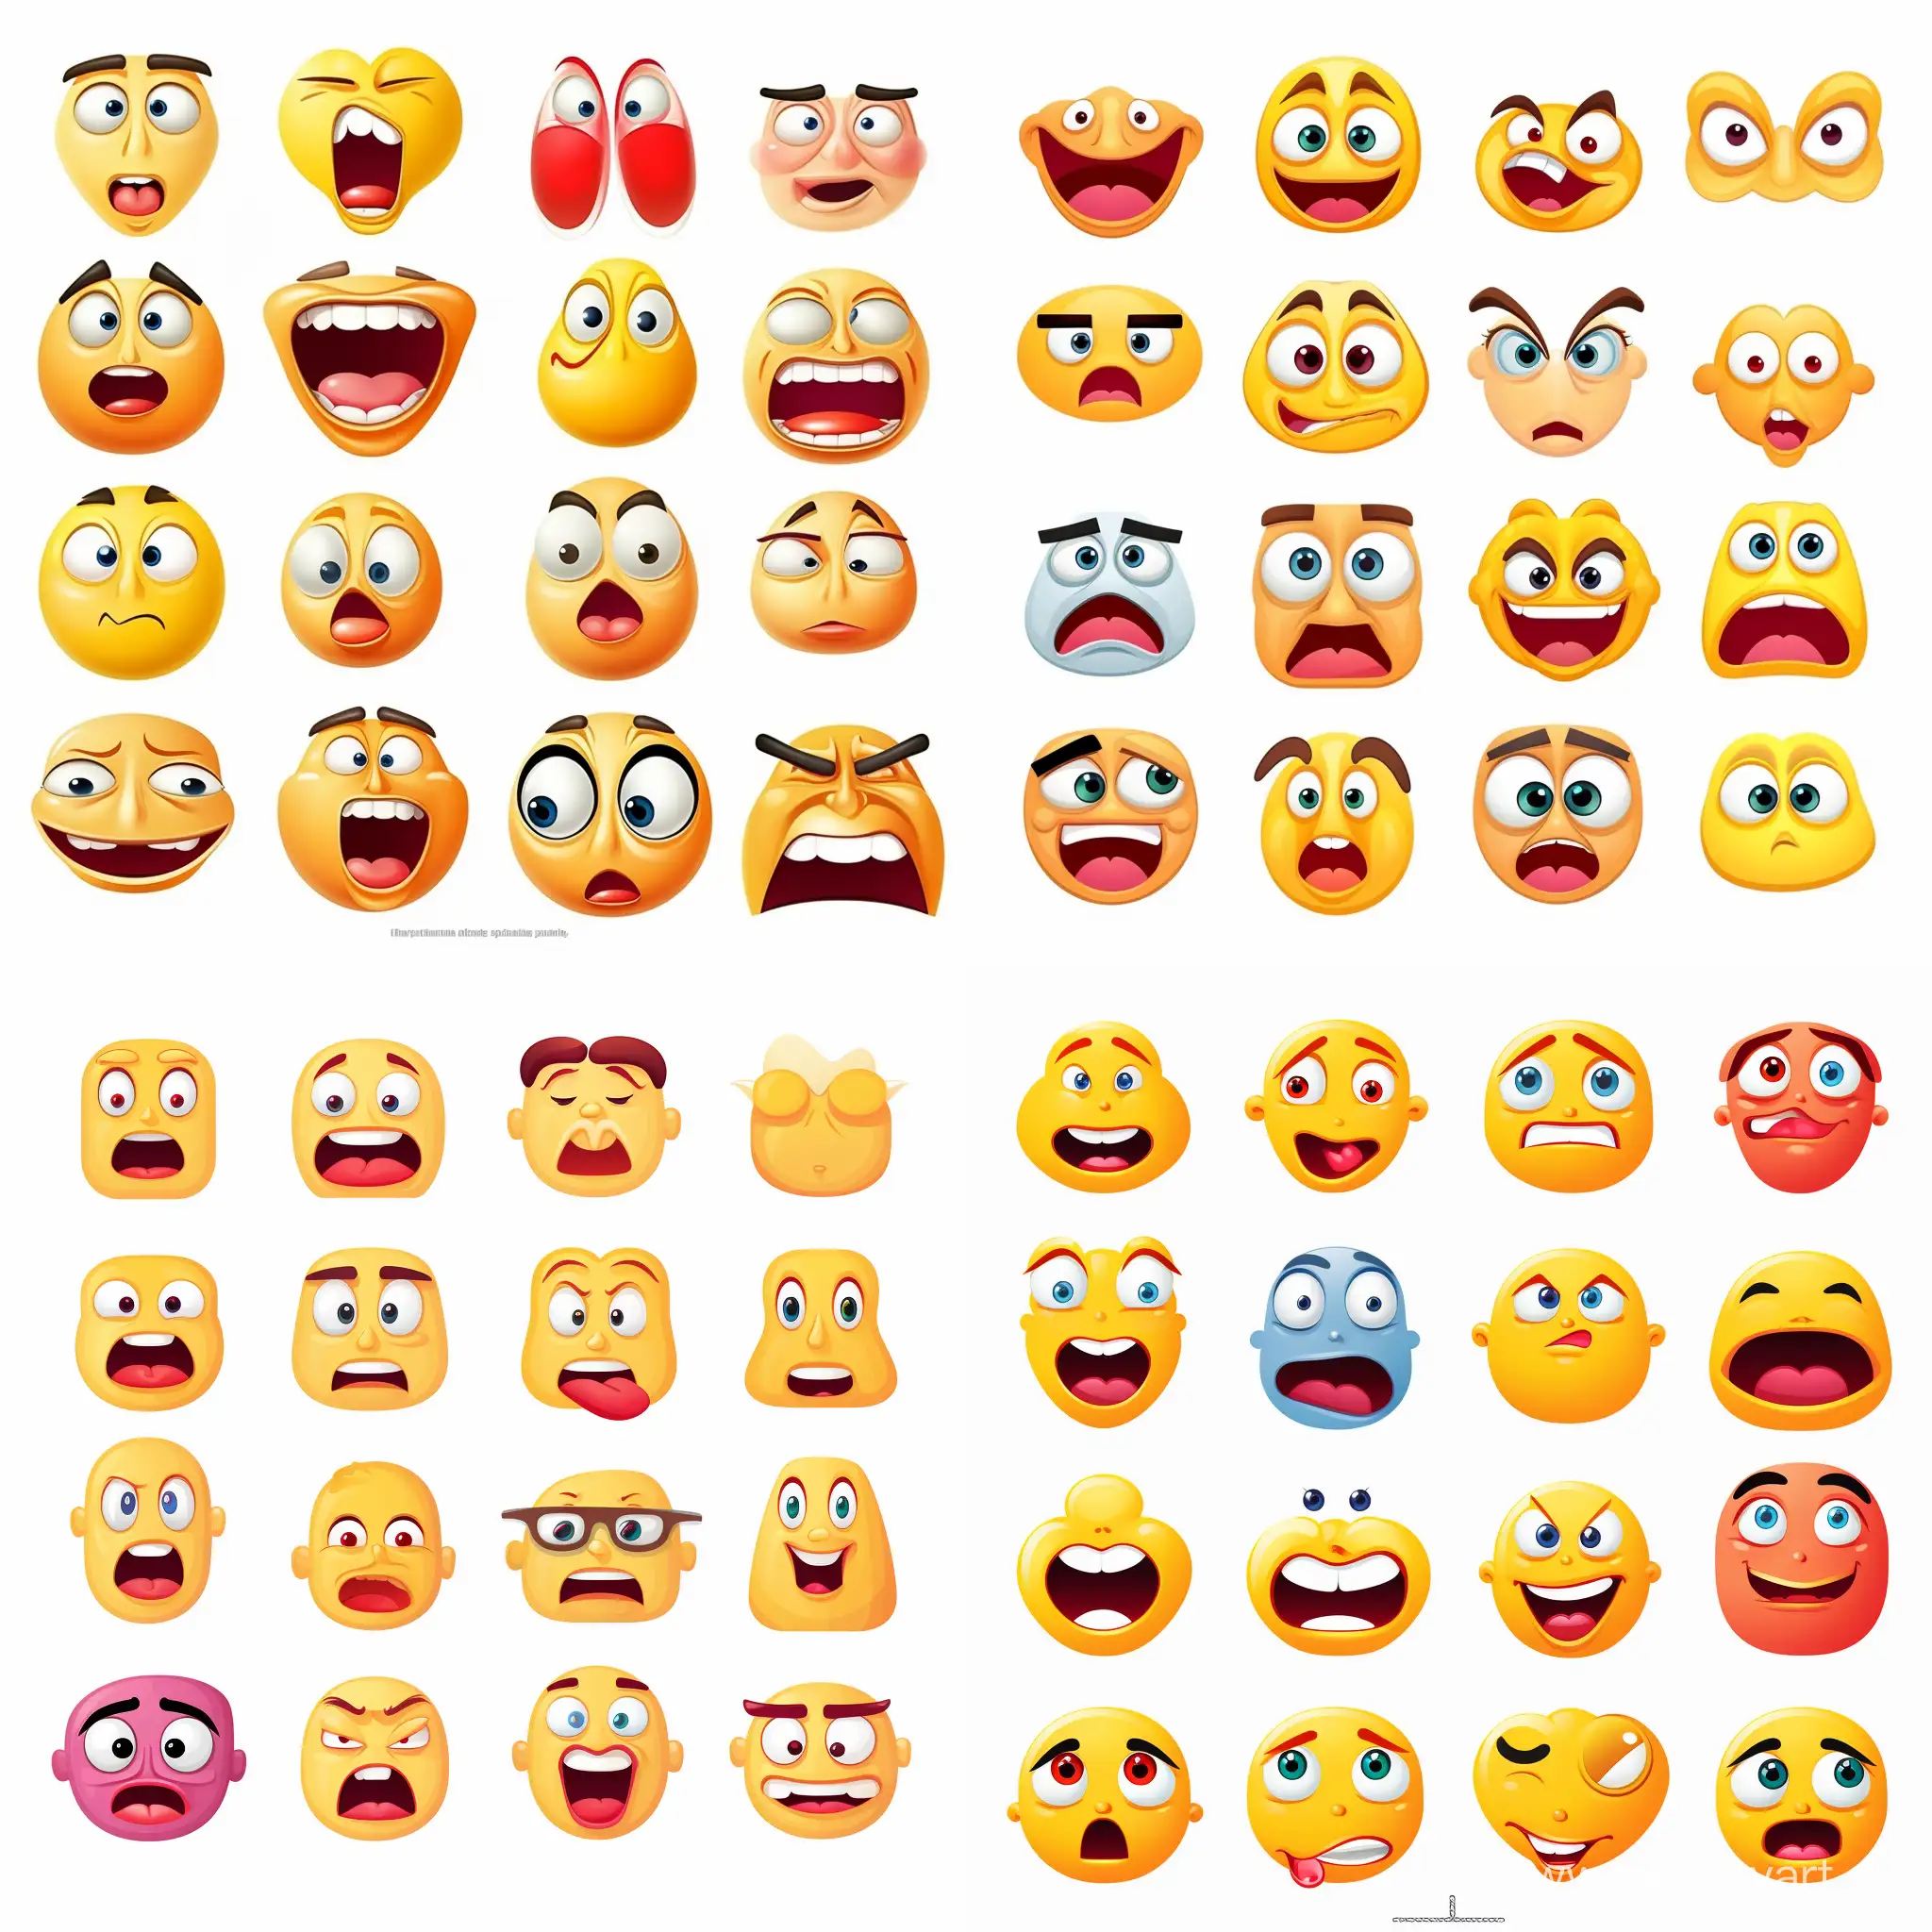 Diverse-Emotions-Collage-in-Vibrant-Emoji-Style-on-White-Background